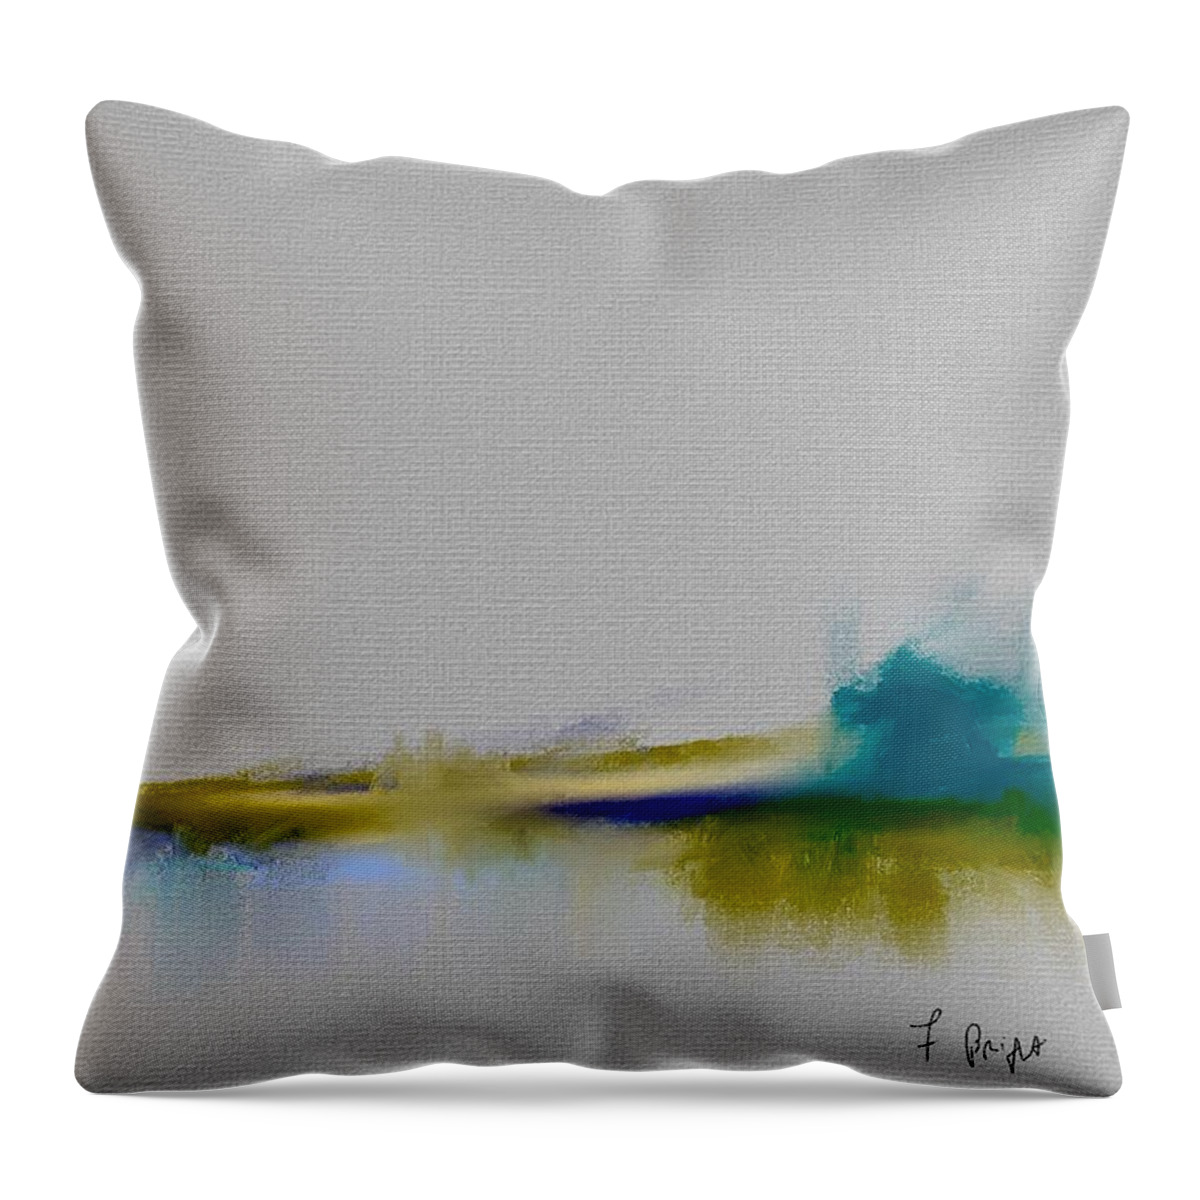 Abstract 2 Throw Pillow featuring the digital art Abstract 2 by Frank Bright